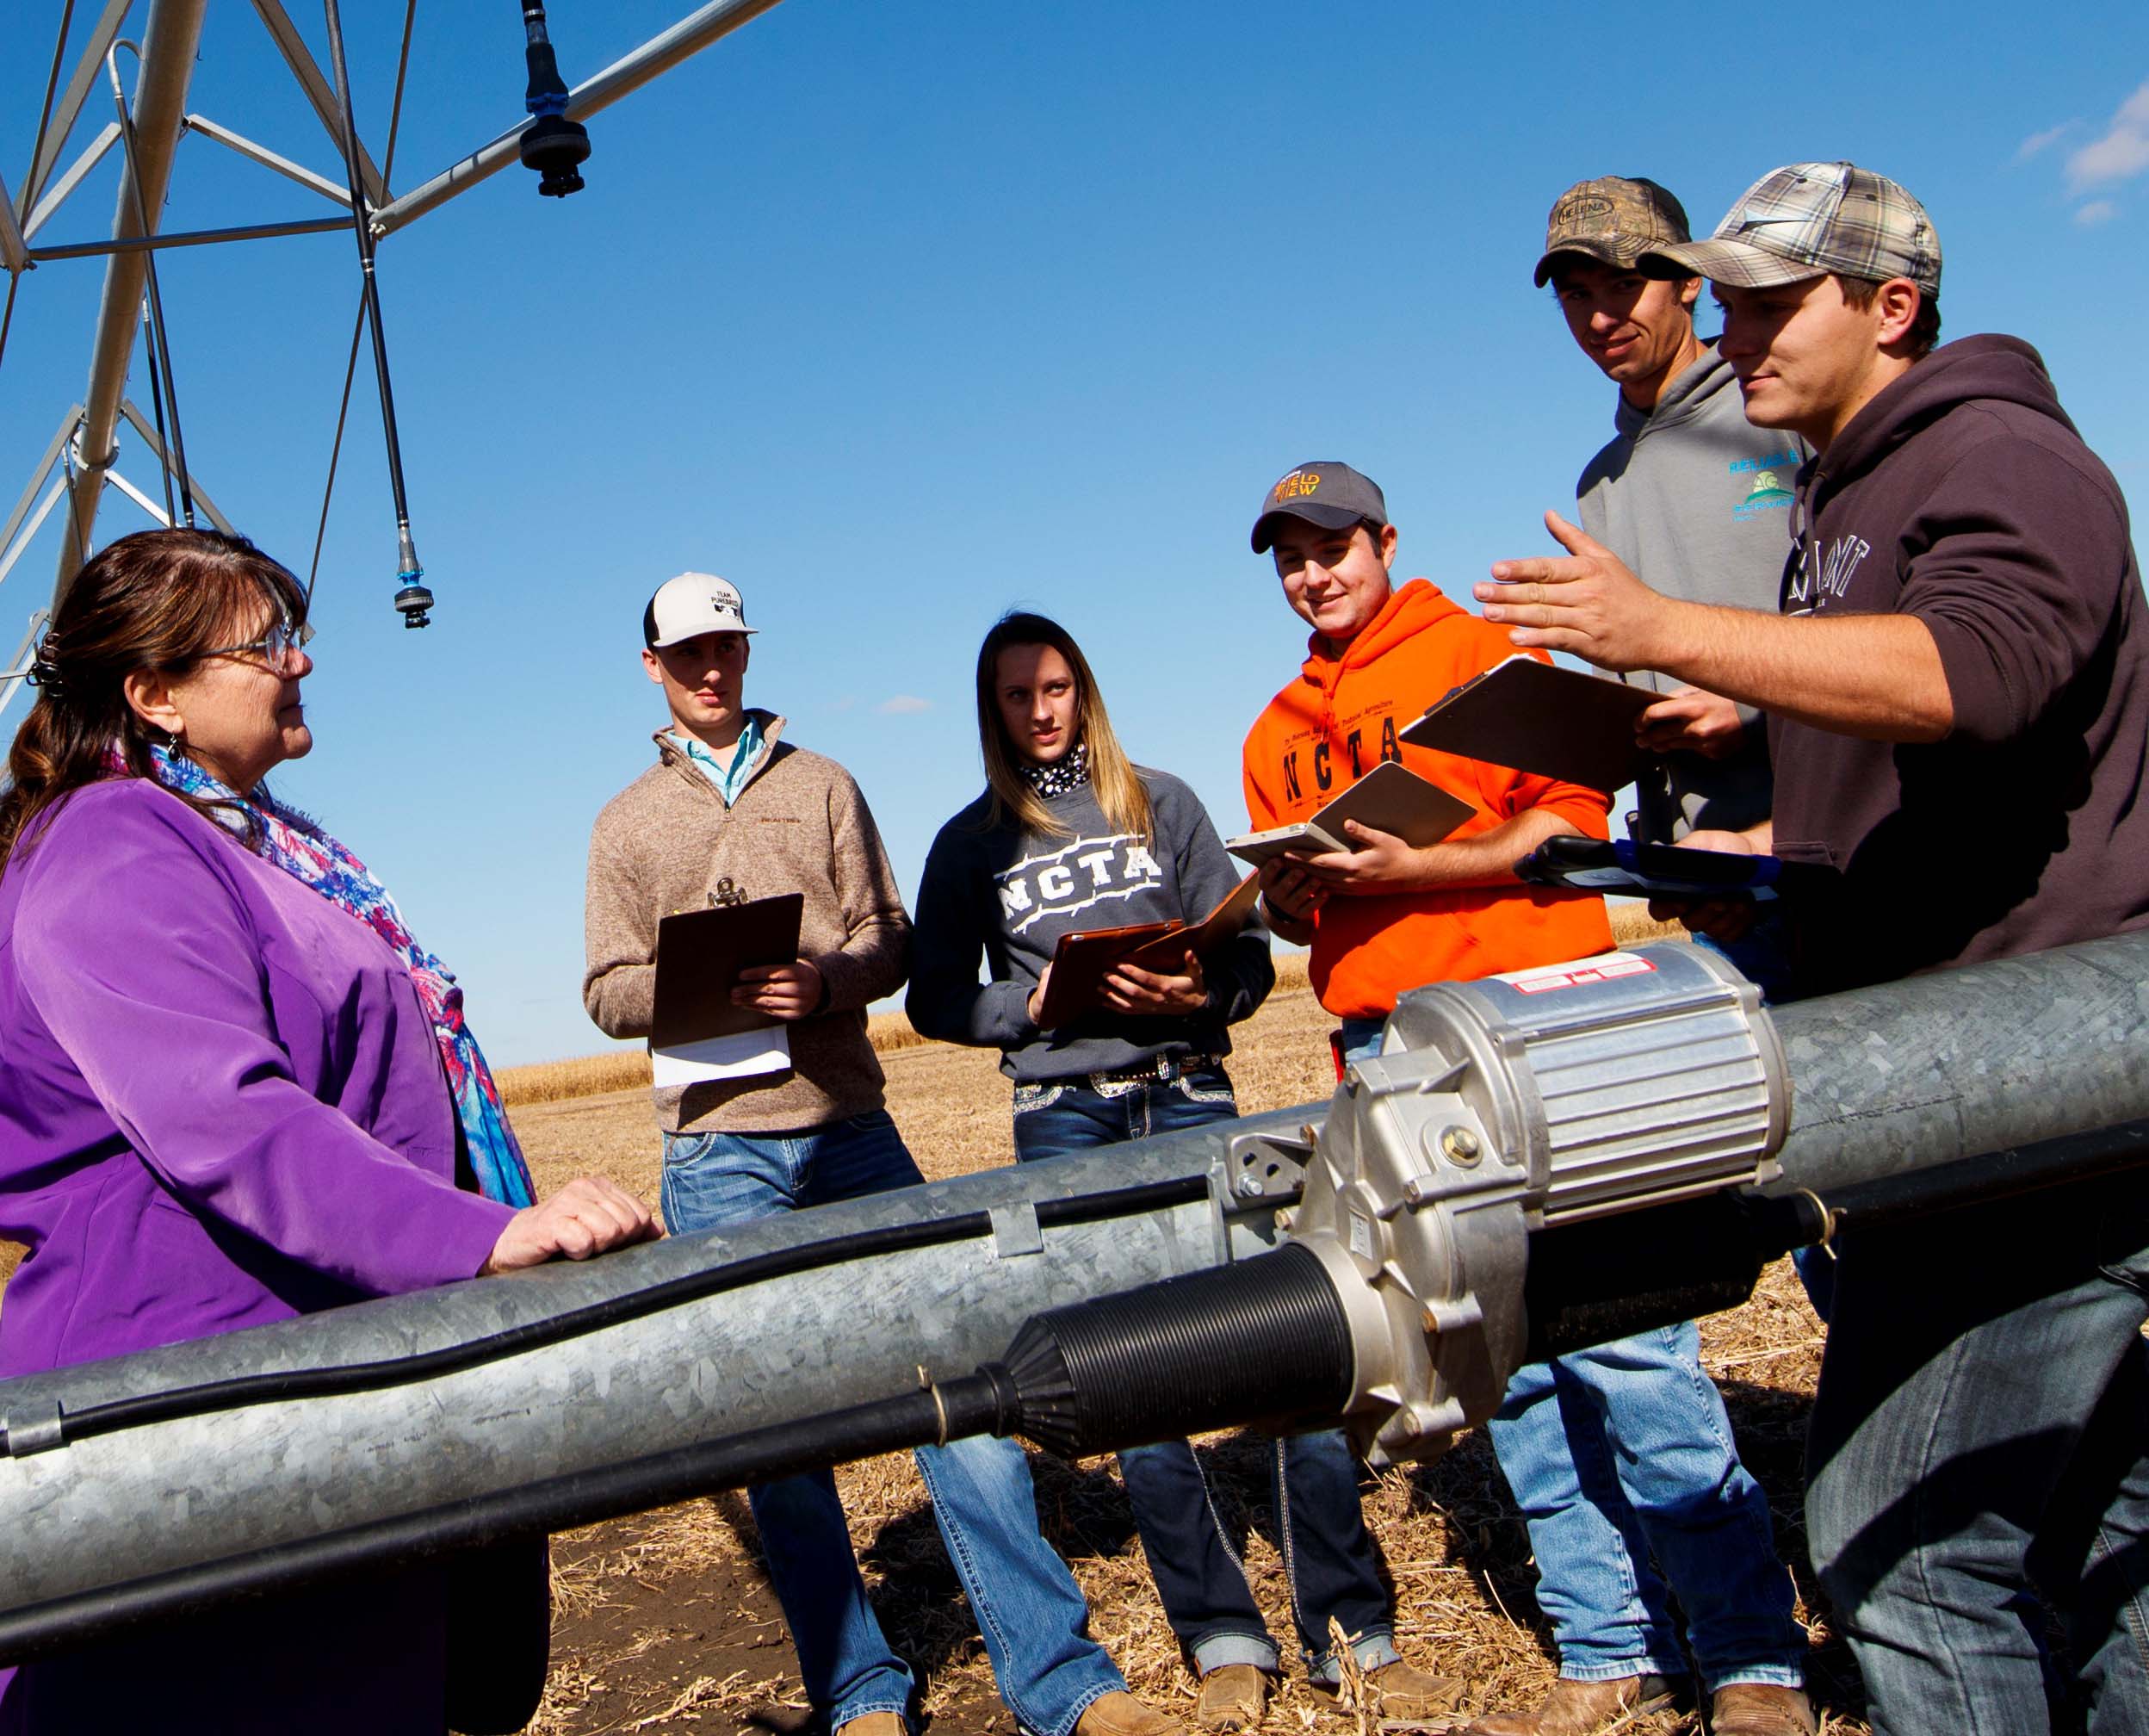 Mary Rittenhouse, Agri Business Management professor, visits with students about costs of production at the NCTA Farm. For high school students in dual credit, she teaches two online classes, Introduction to Ag Economics and Principles of Microeconomics. (Chandler/NCTA Photo)